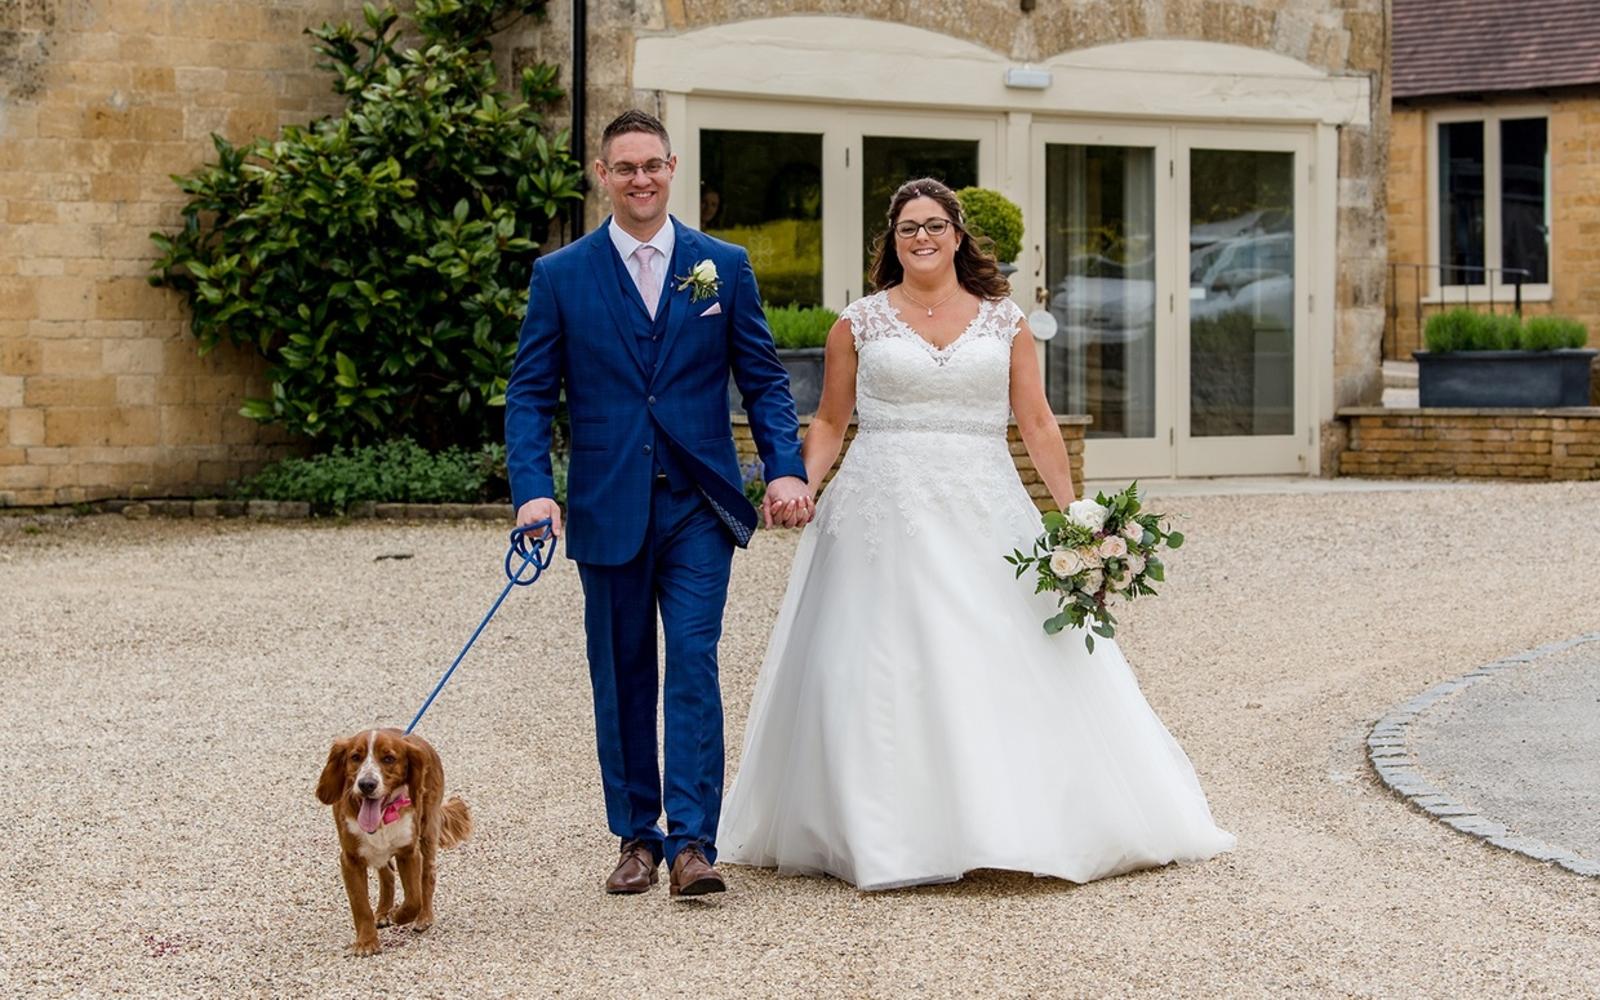 Capture Every Moment wedding photography duo from Cirencester reportage and traditional photographers Lapstone Barn Chipping Campden Cotswolds venue dog joining the wedding day family life 